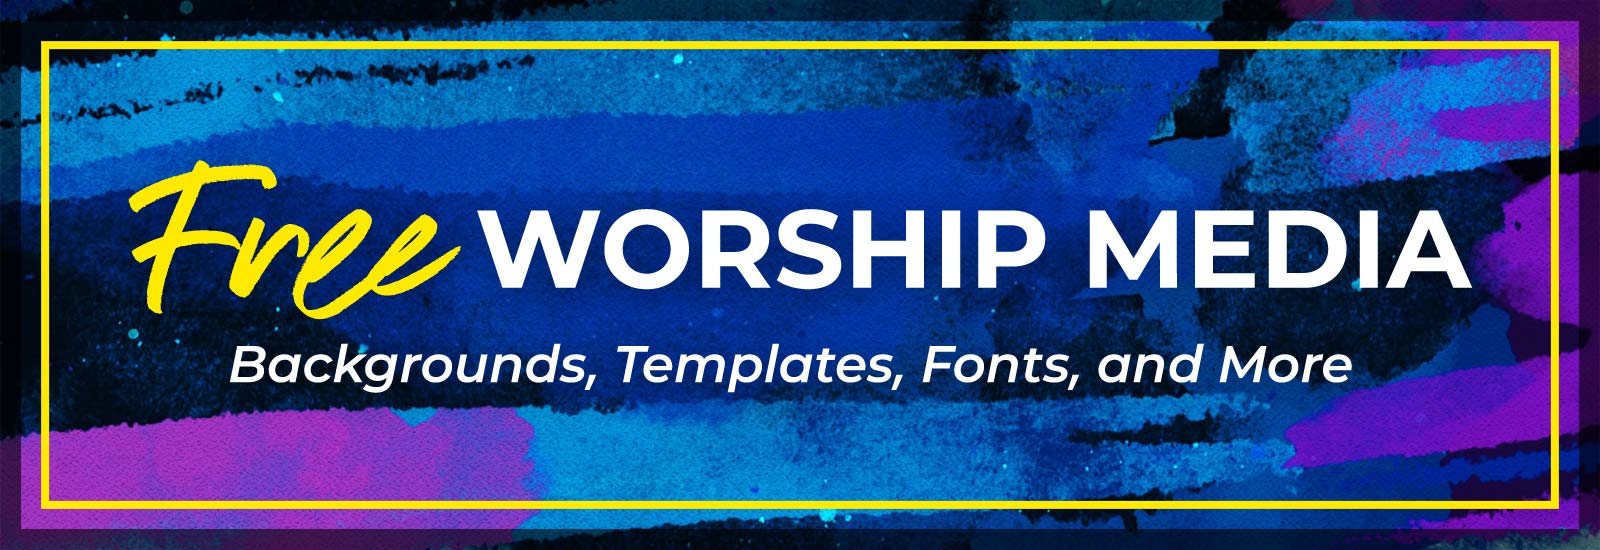 praise and worship backgrounds